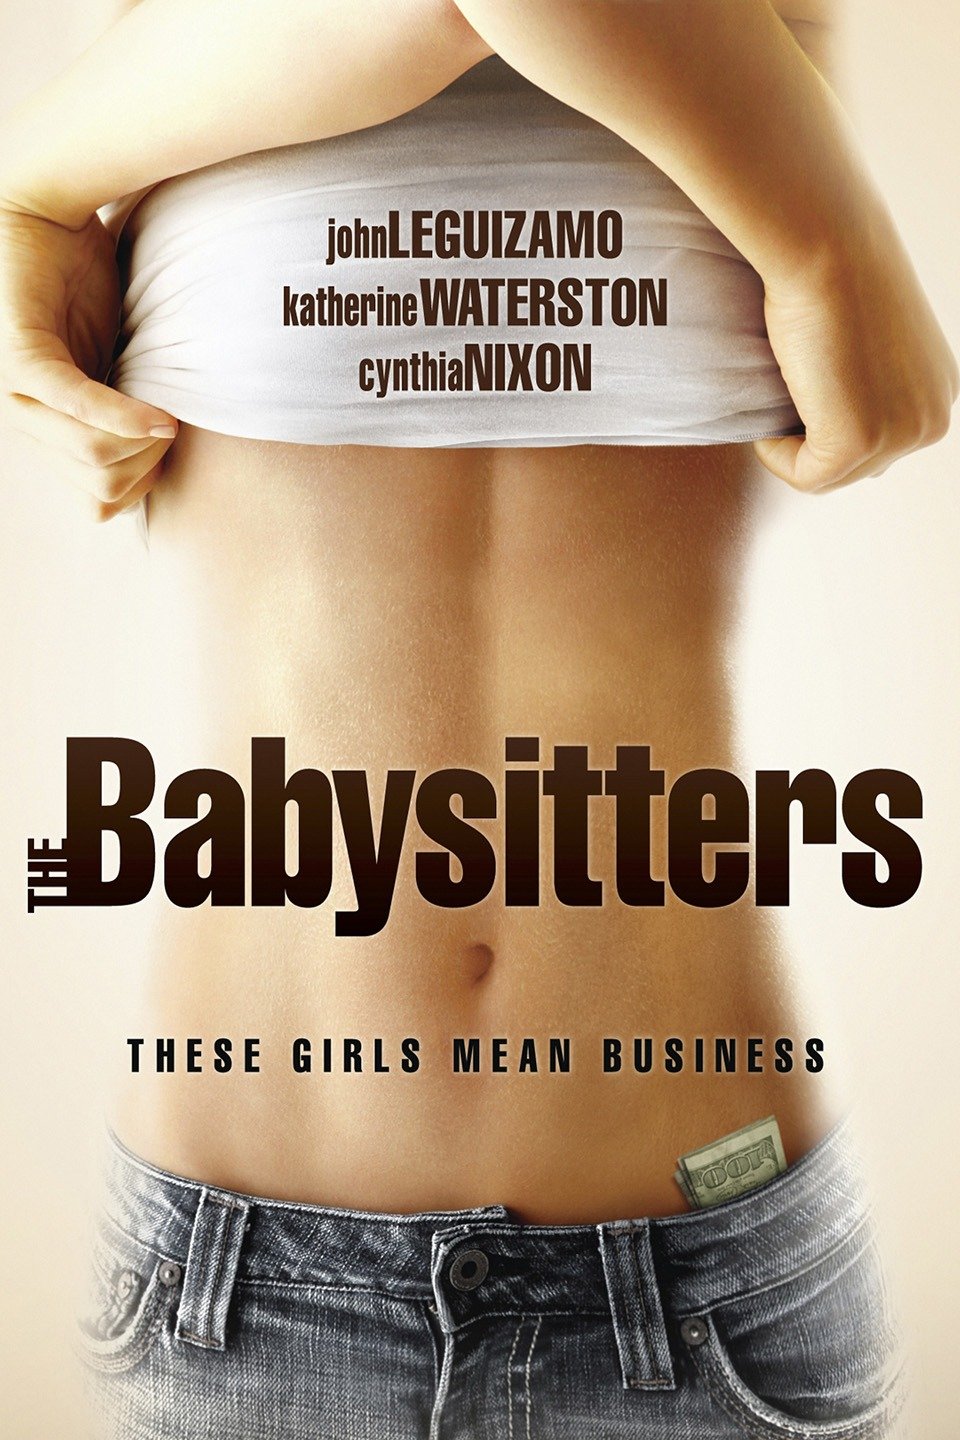 Drugged Babysitter Porn - The Babysitters - Rotten Tomatoes